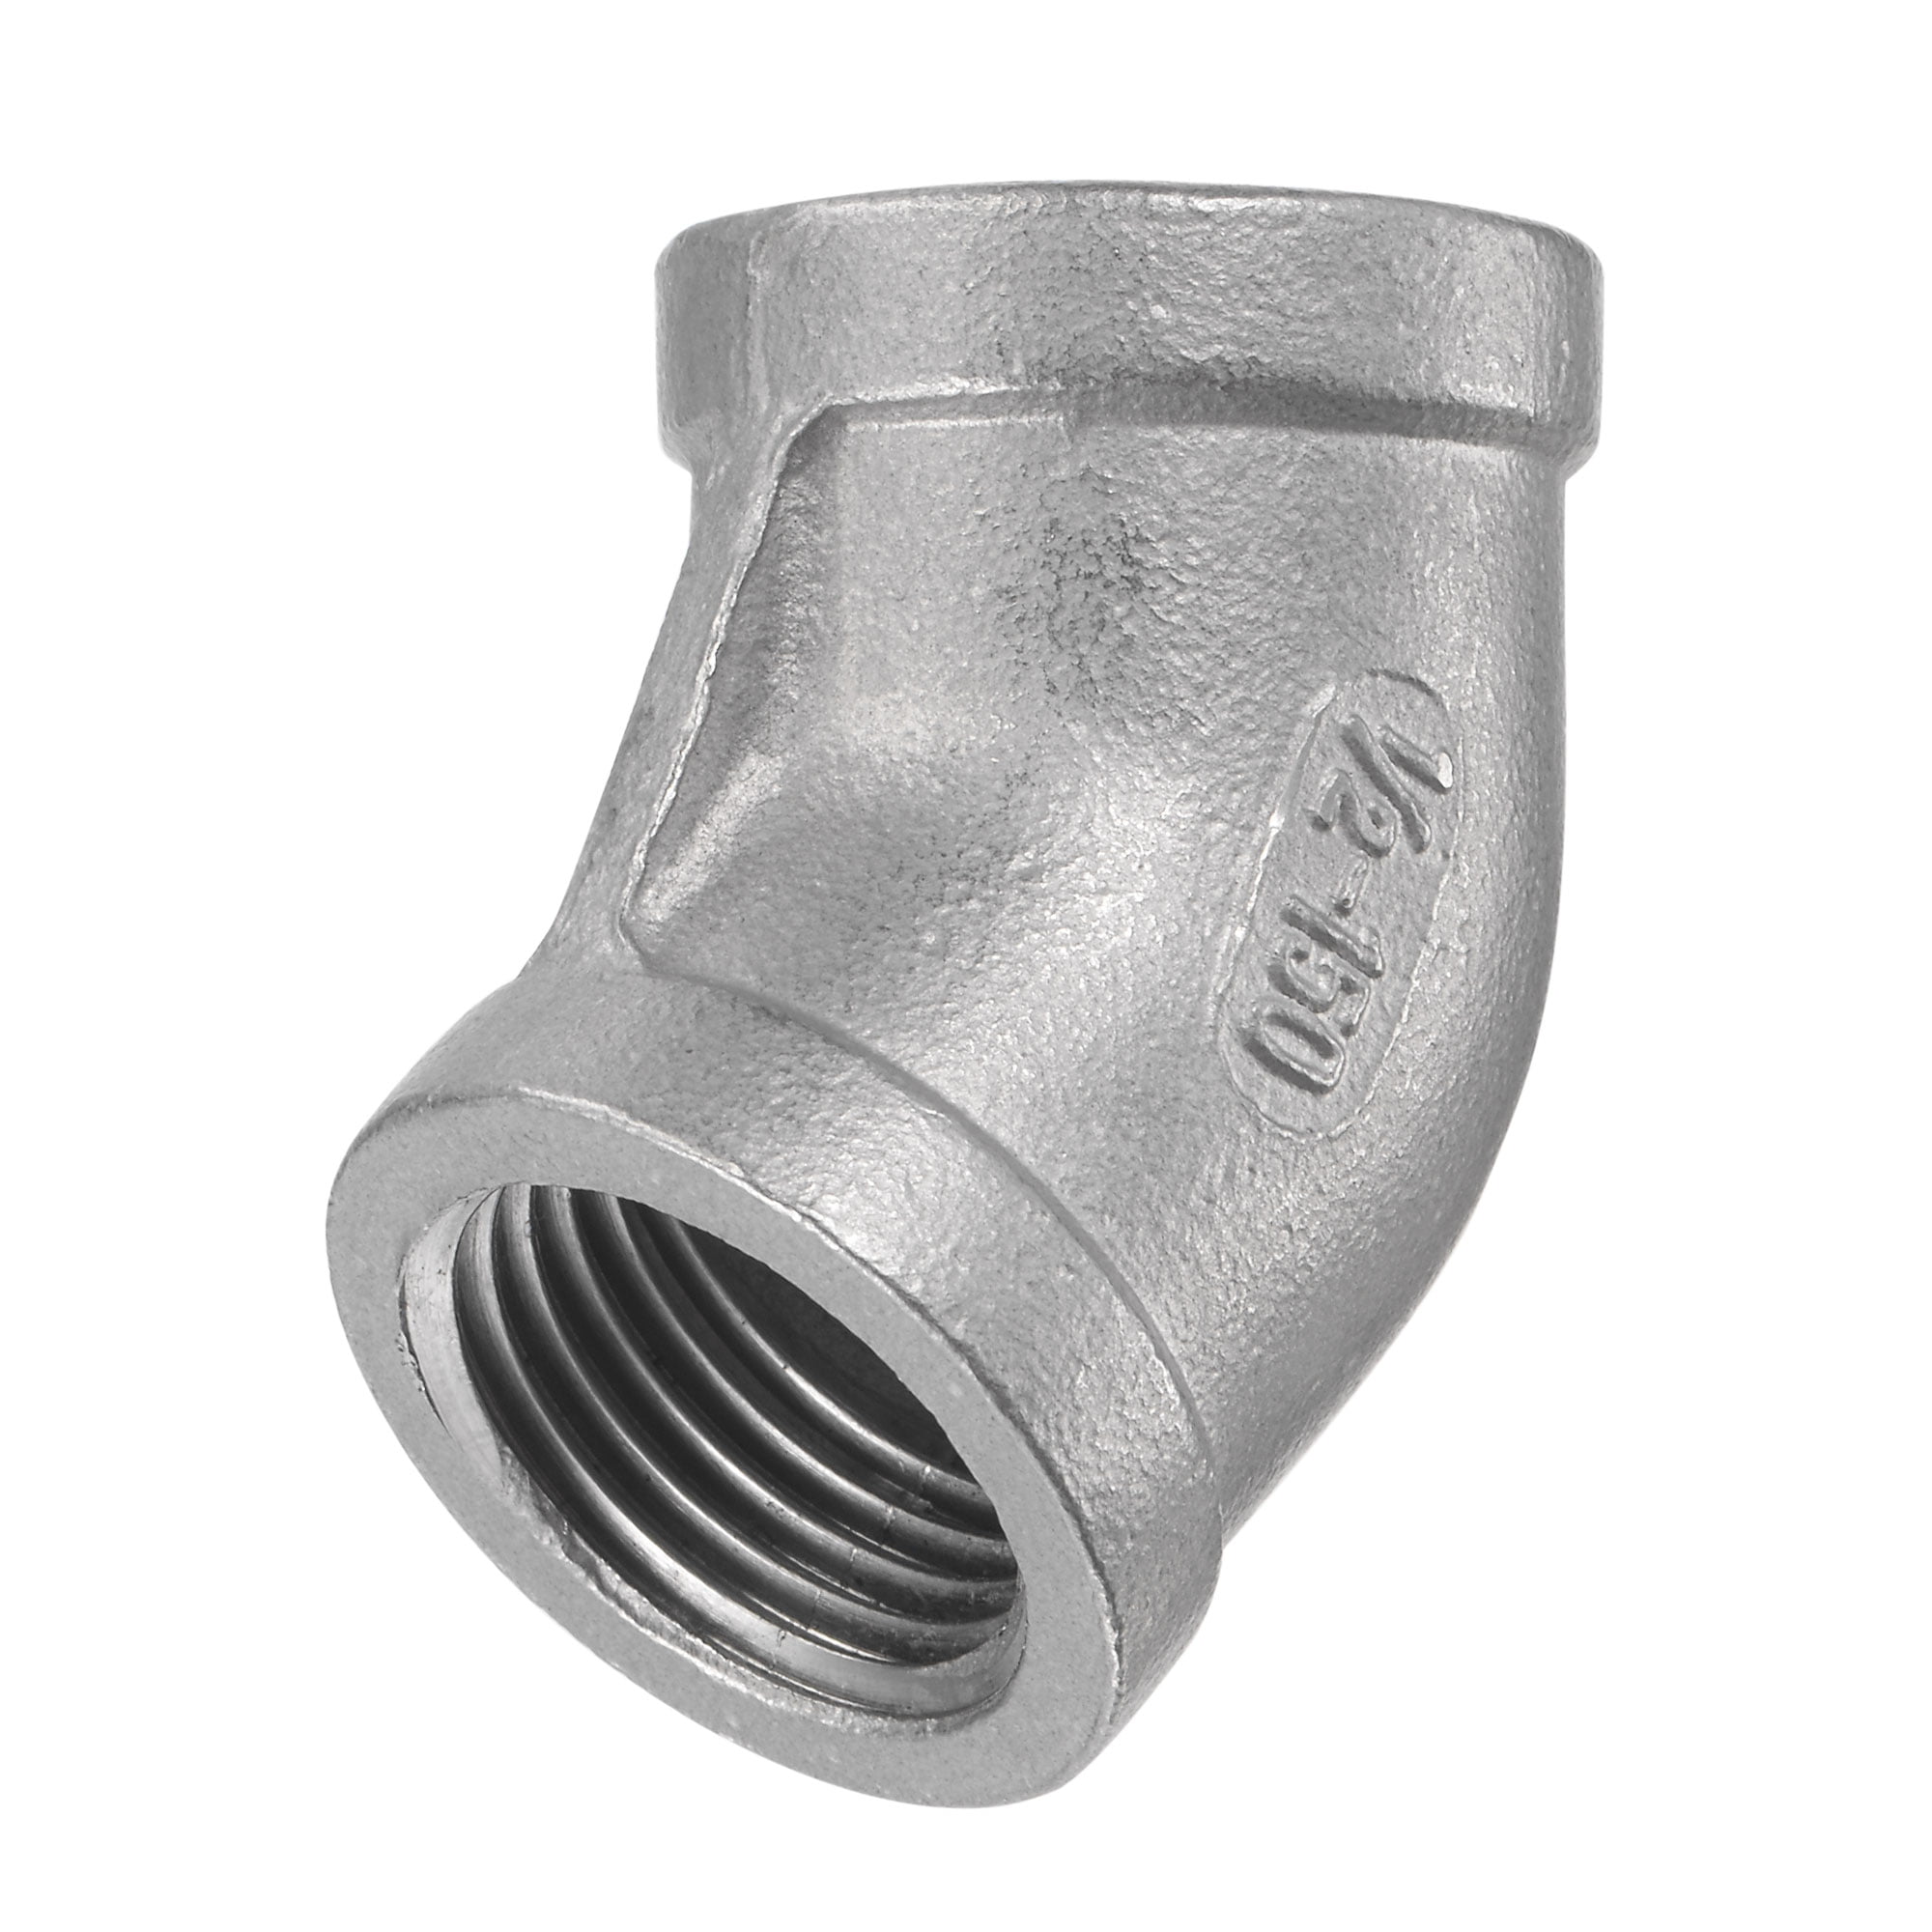 Pack of 3-1" BSP Female 304 SS 45 Degree Elbow Pipe Fitting Connector Water 